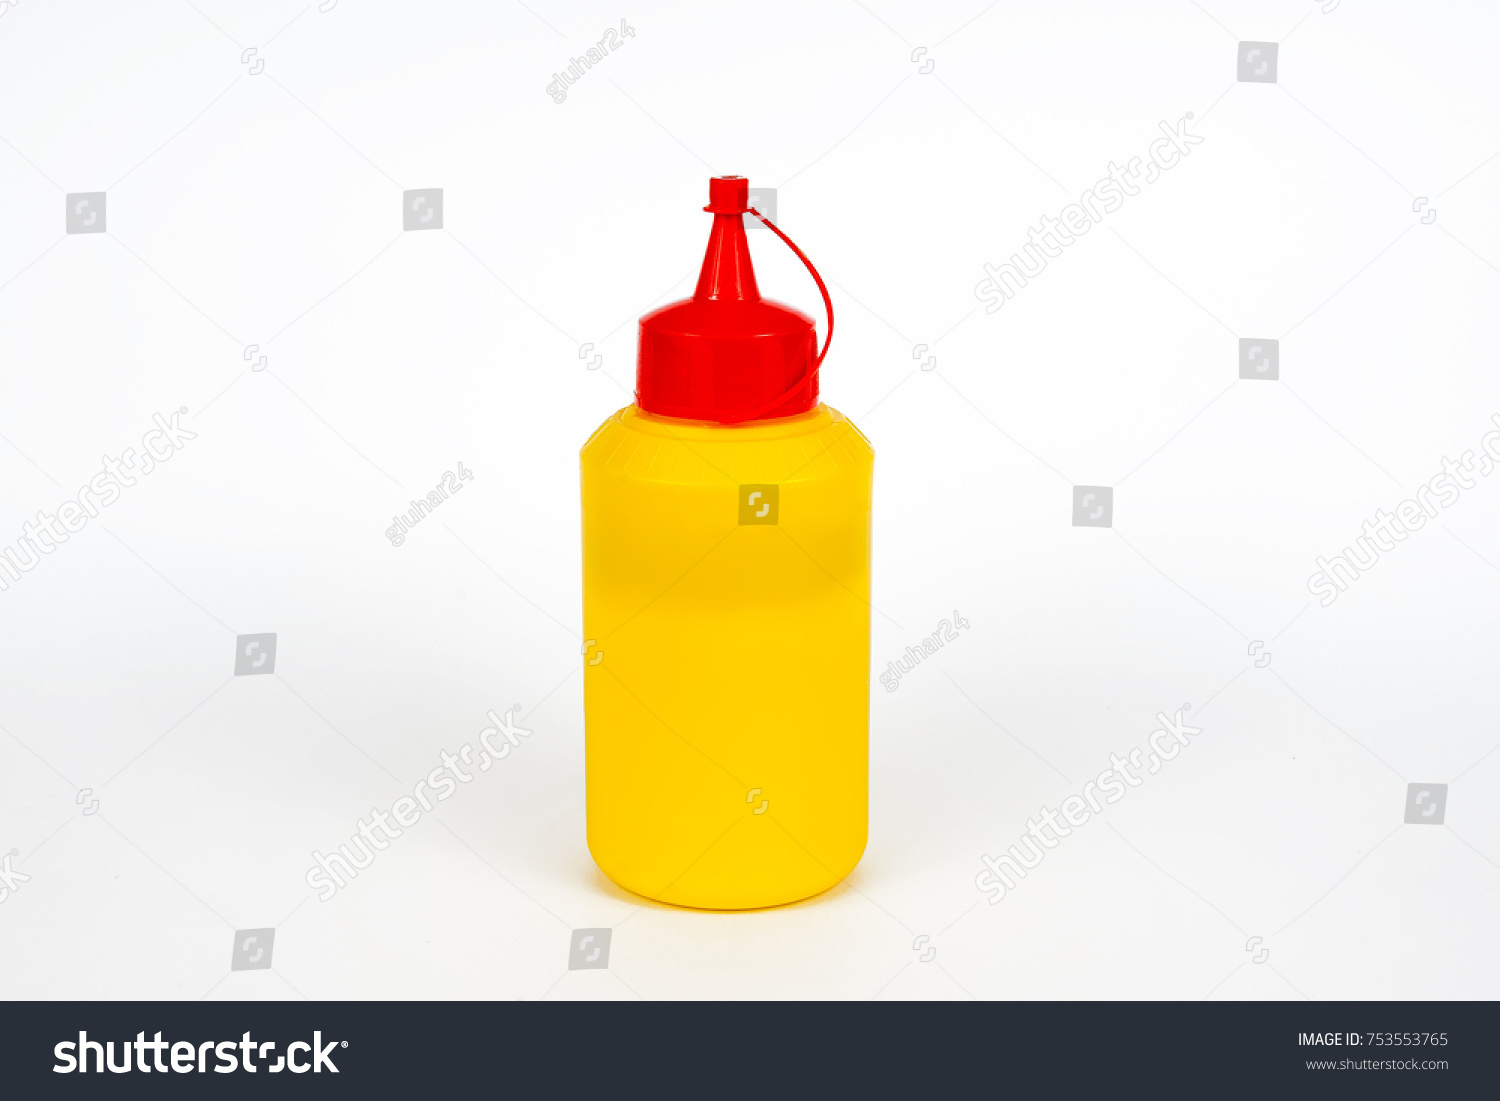 Download Yellow Jar Red Cap On White Miscellaneous Stock Image 753553765 Yellowimages Mockups